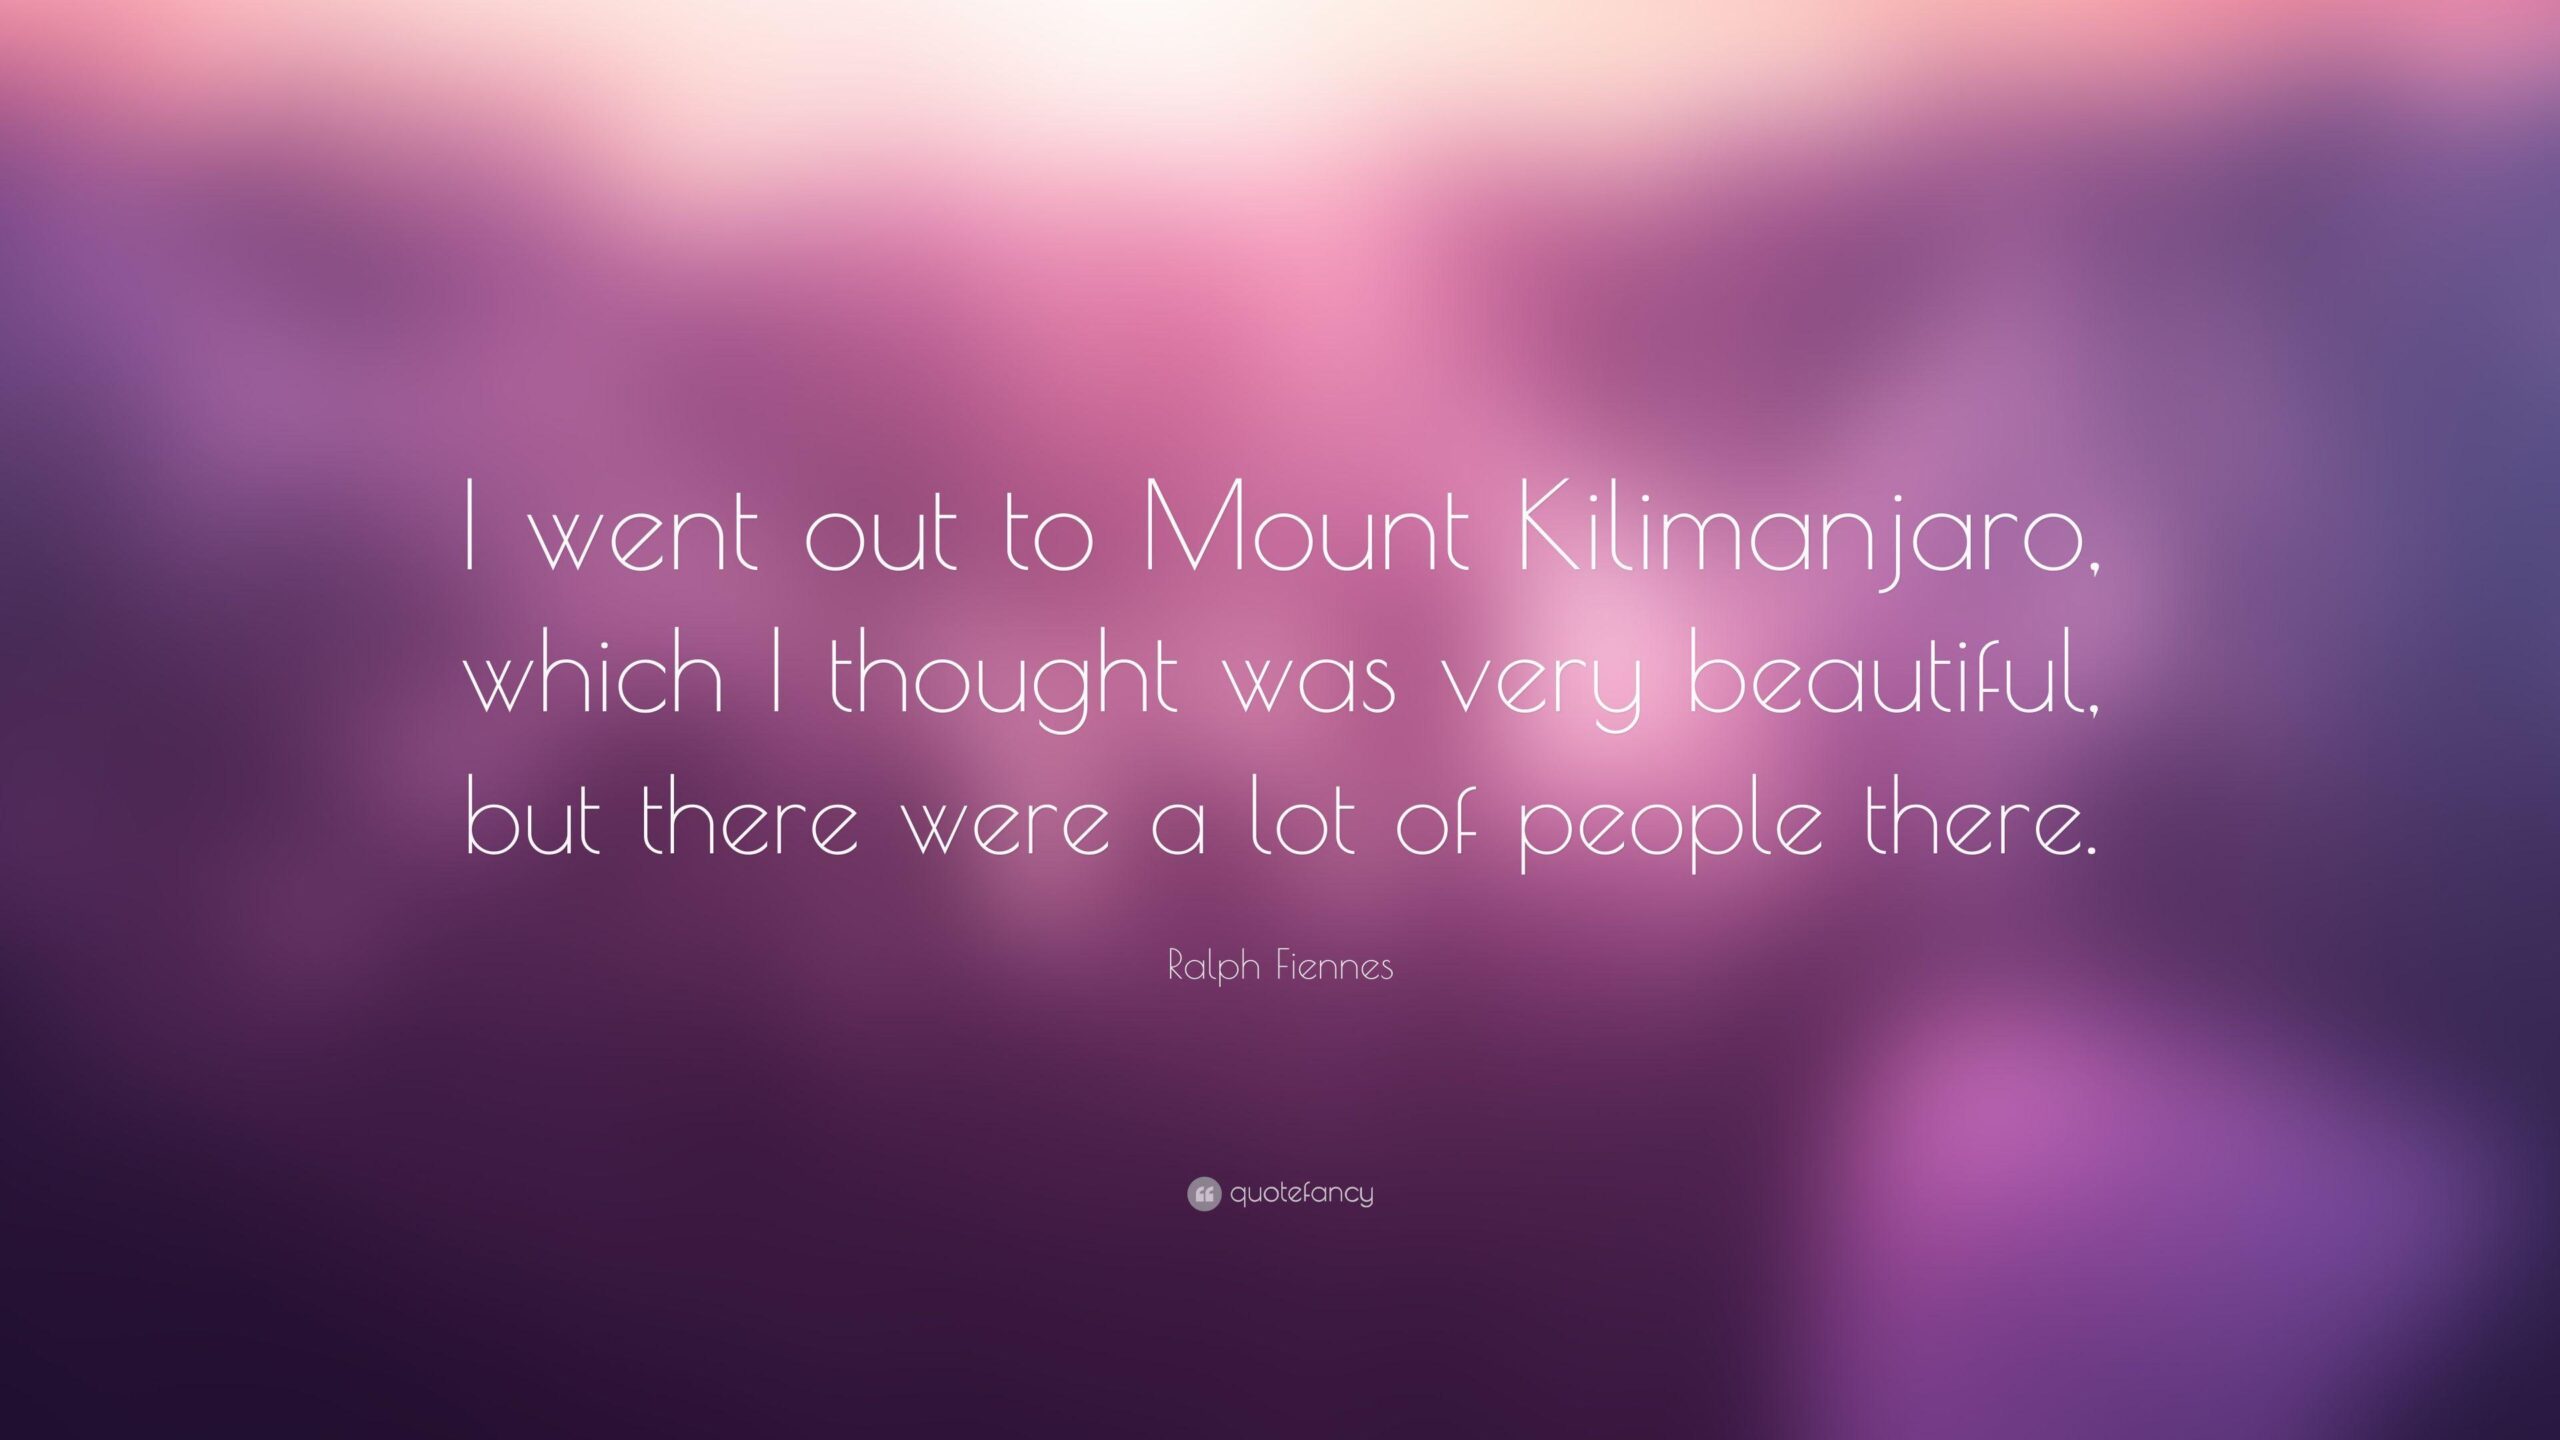 Ralph Fiennes Quote “I went out to Mount Kilimanjaro, which I